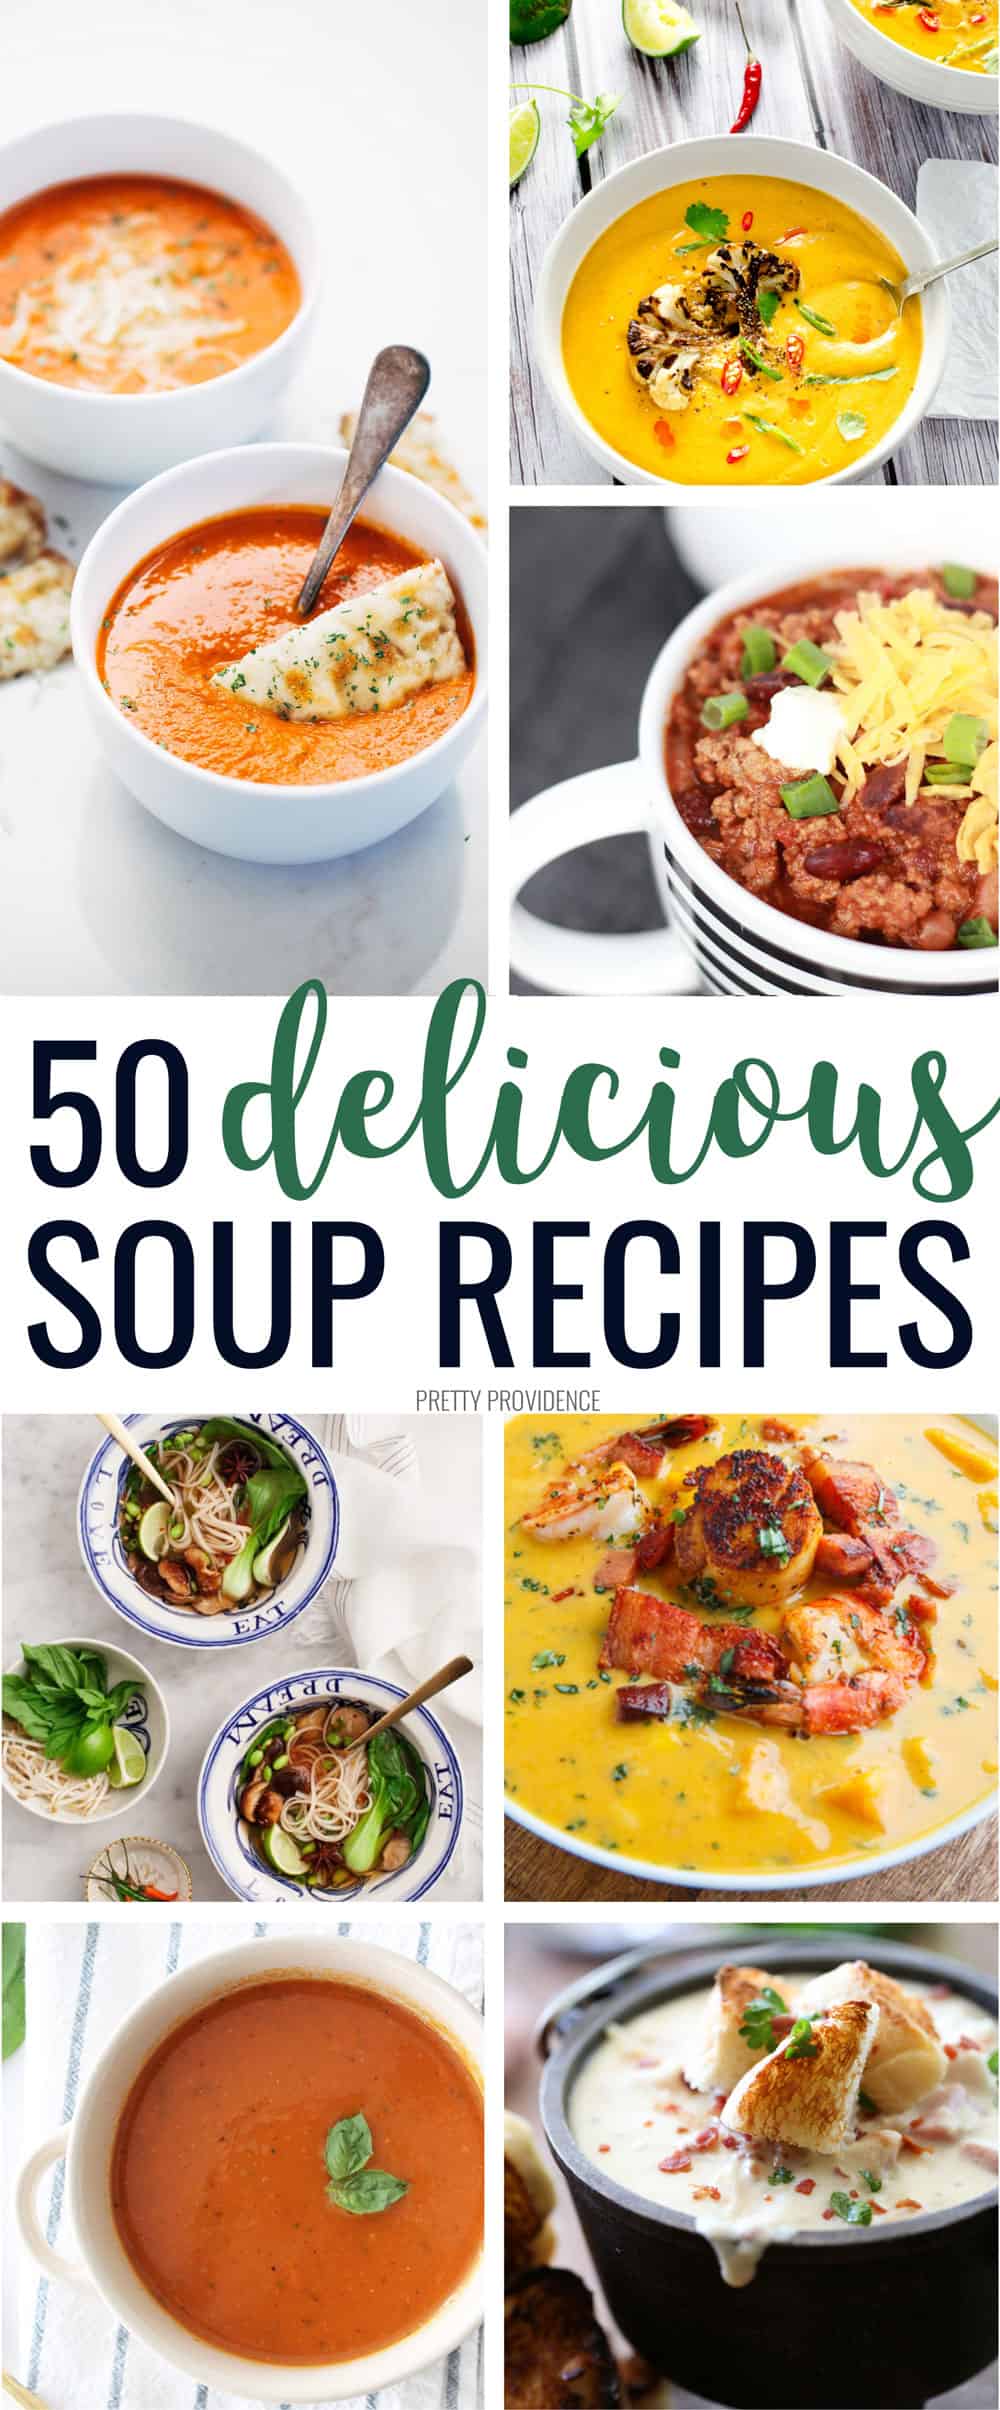 Easy Soup Recipes to Try ASAP - Pretty Providence